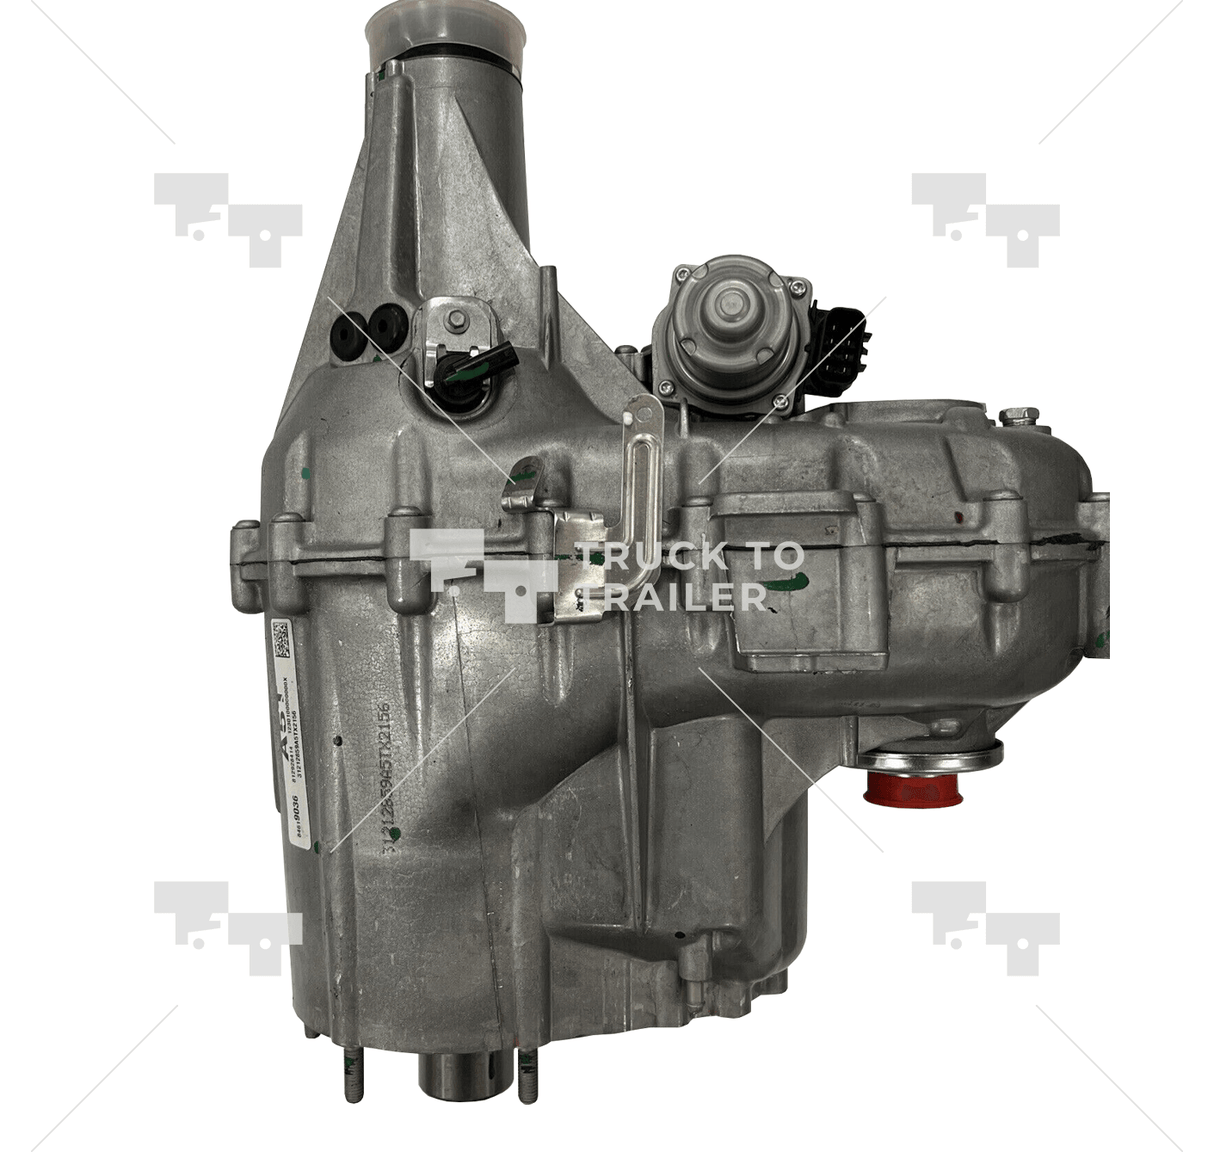 812928414 Genuine Gm Transfer Case Assembly For Gmc And Chevrolet - Truck To Trailer